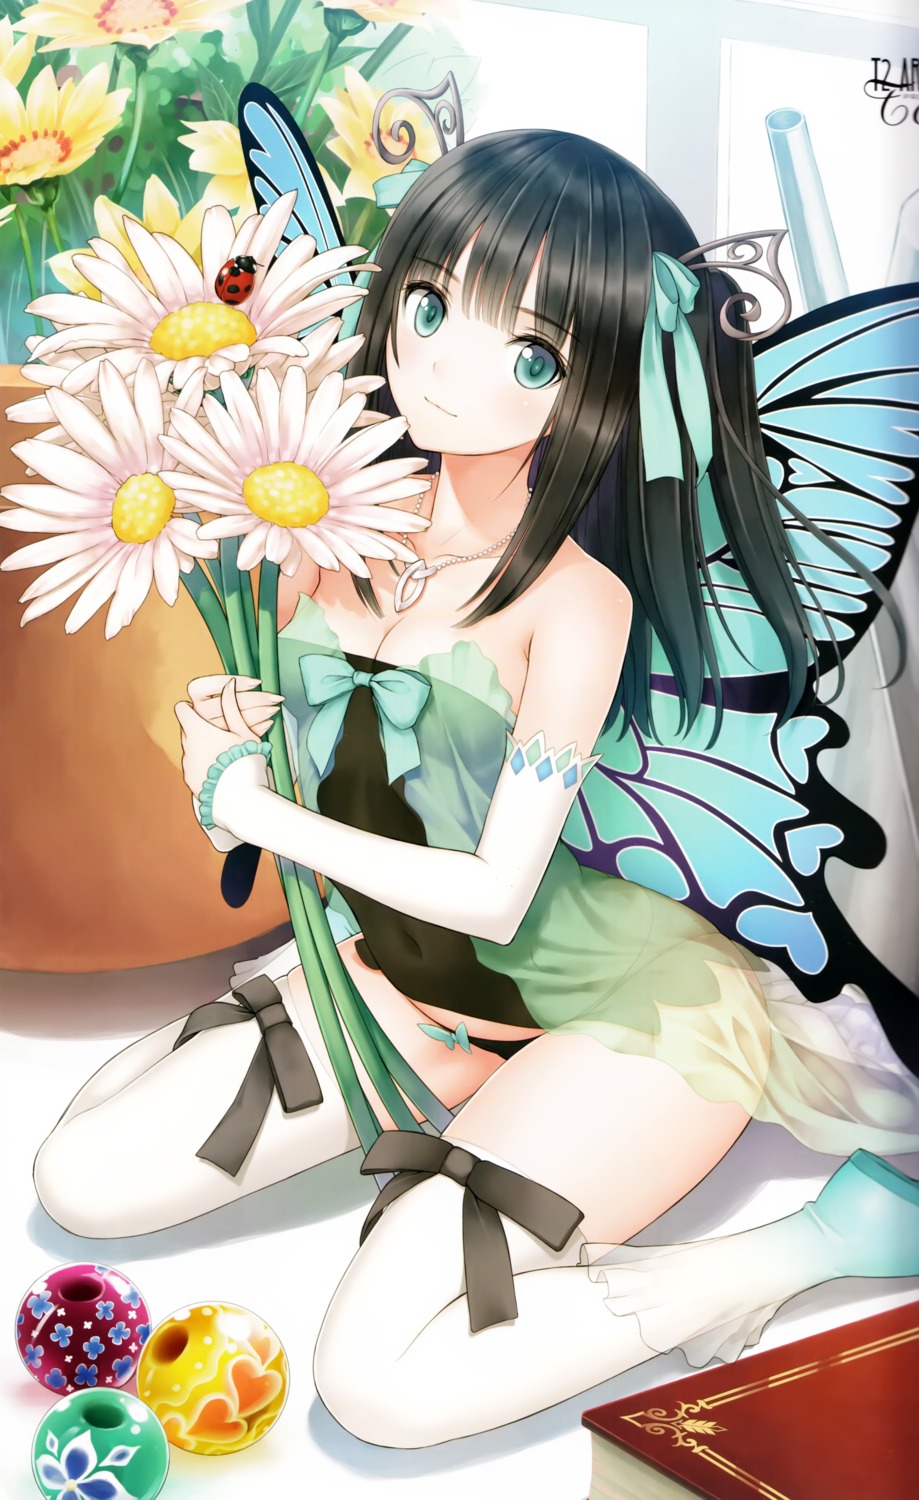 binding_discoloration cleavage dress fairy pantsu peace_keeper_daisy see_through thighhighs tony_taka wings